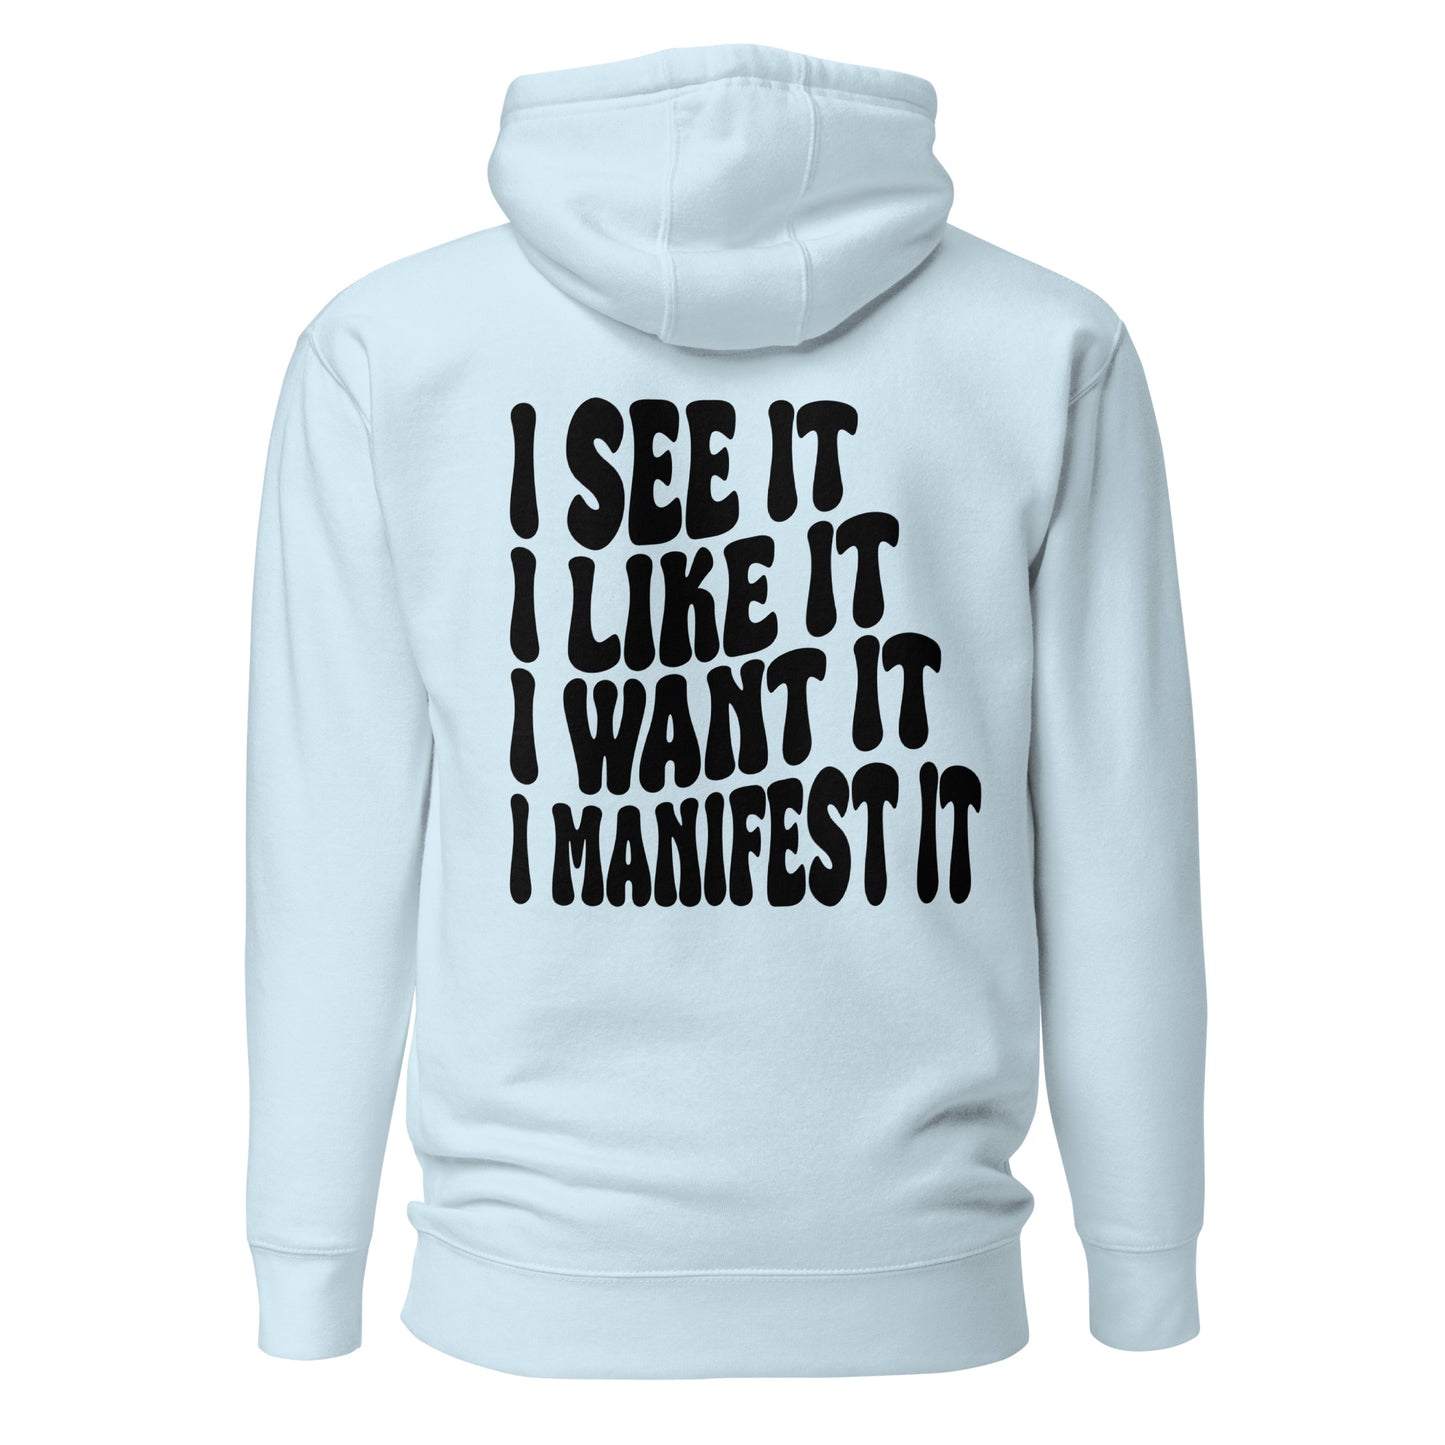 I See It, Like It, Want It, Manifest It Quality Cotton Heritage Adult Hoodie